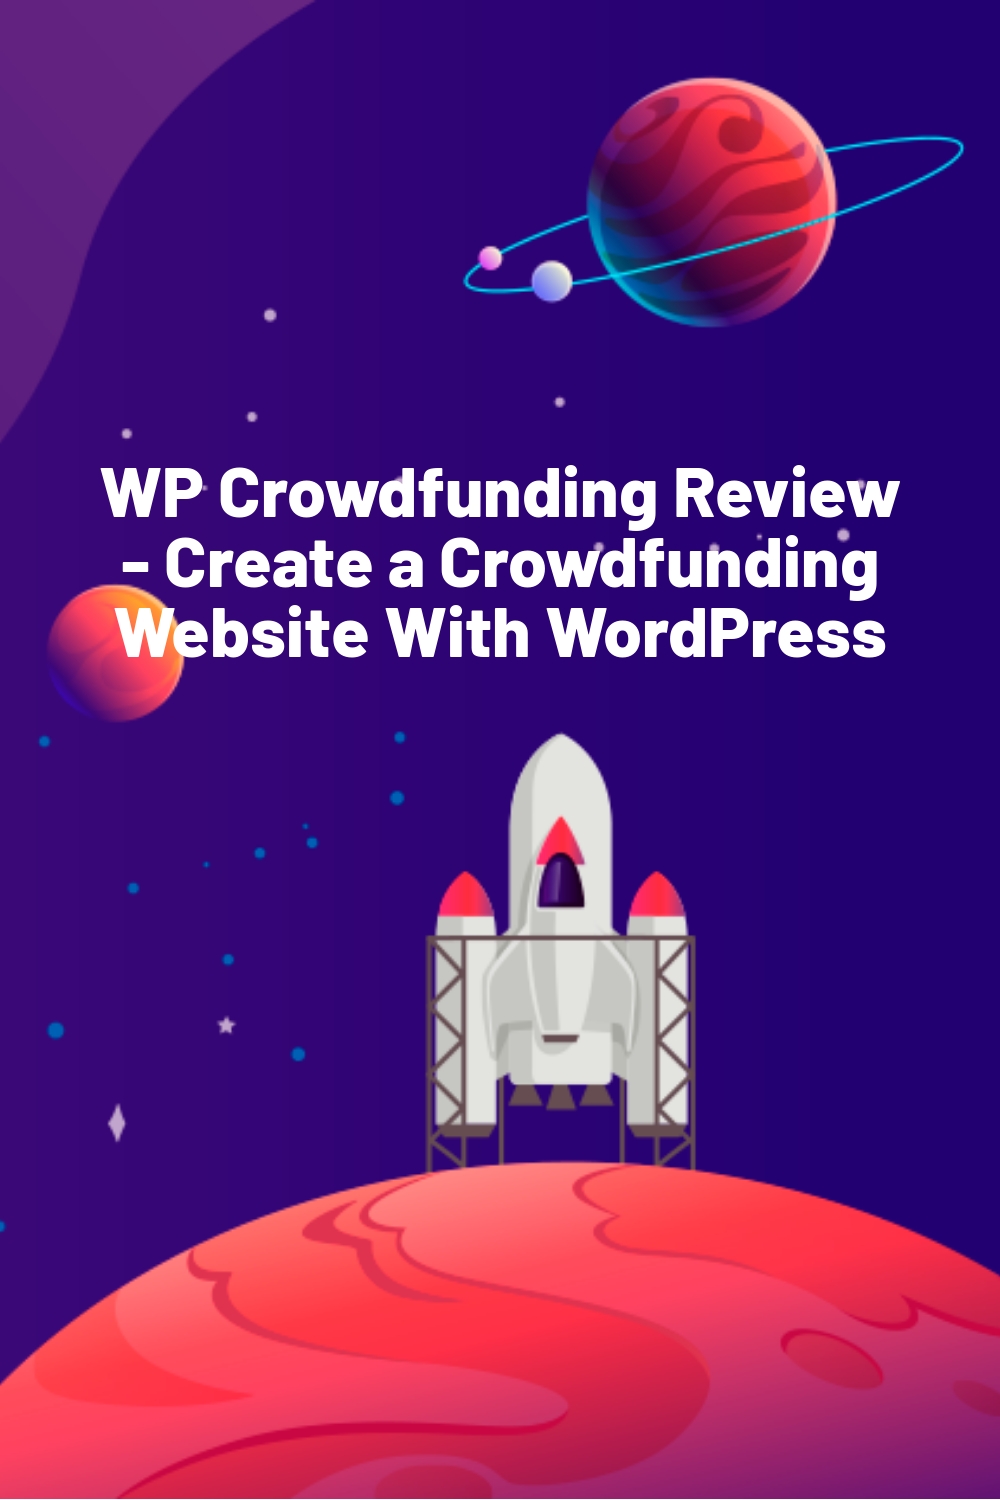 WP Crowdfunding Review – Create a Crowdfunding Website With WordPress